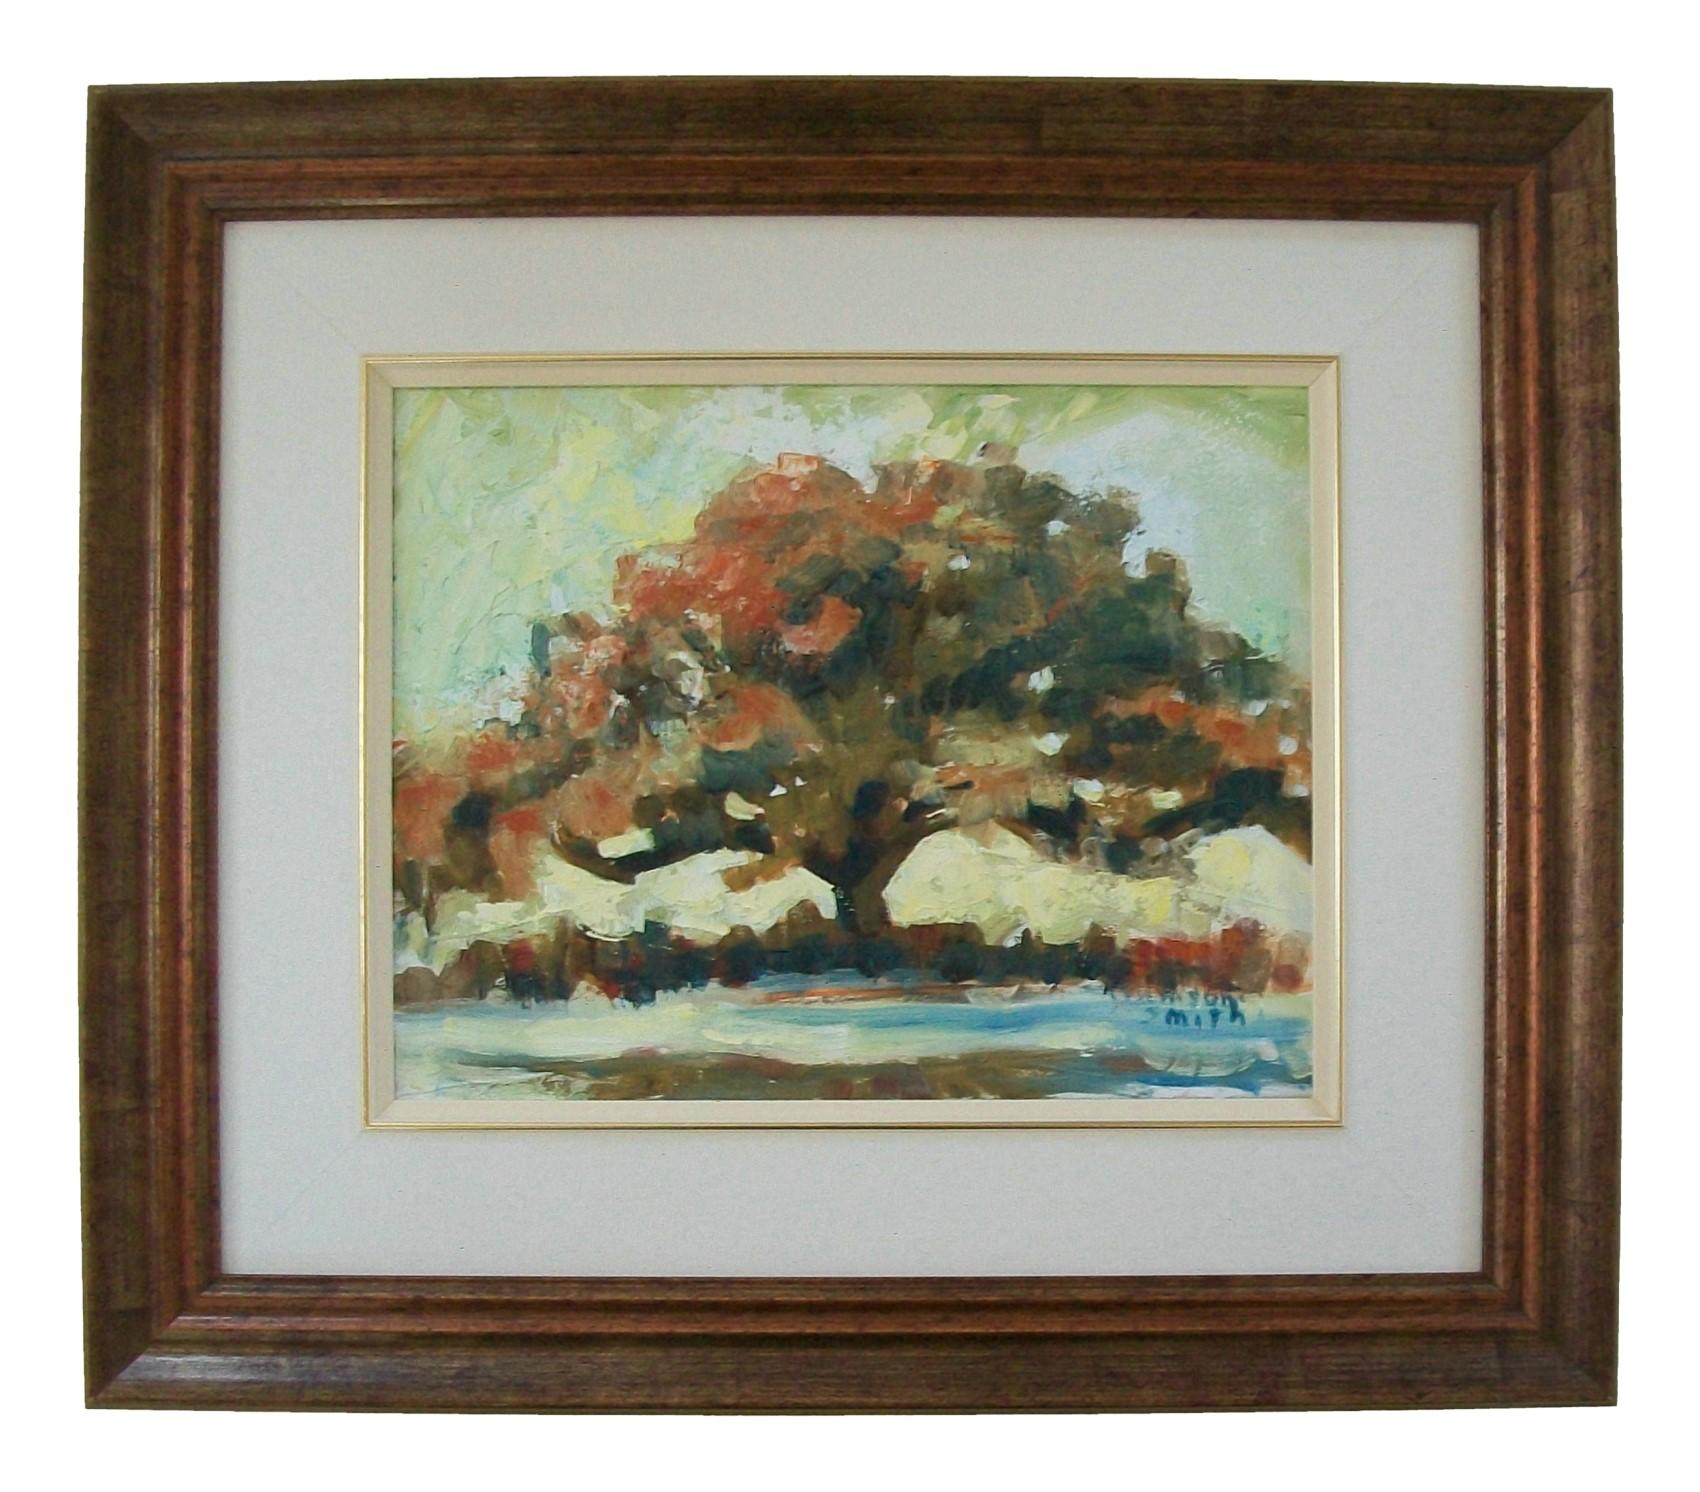 Post Impressionist acrylic landscape painting on stretched canvas - featuring a large tree in the foreground - finished with a fabric matte with composite gilt filet - copper giltwood frame with an antique finish - indistinctly signed (?mson-Smith)